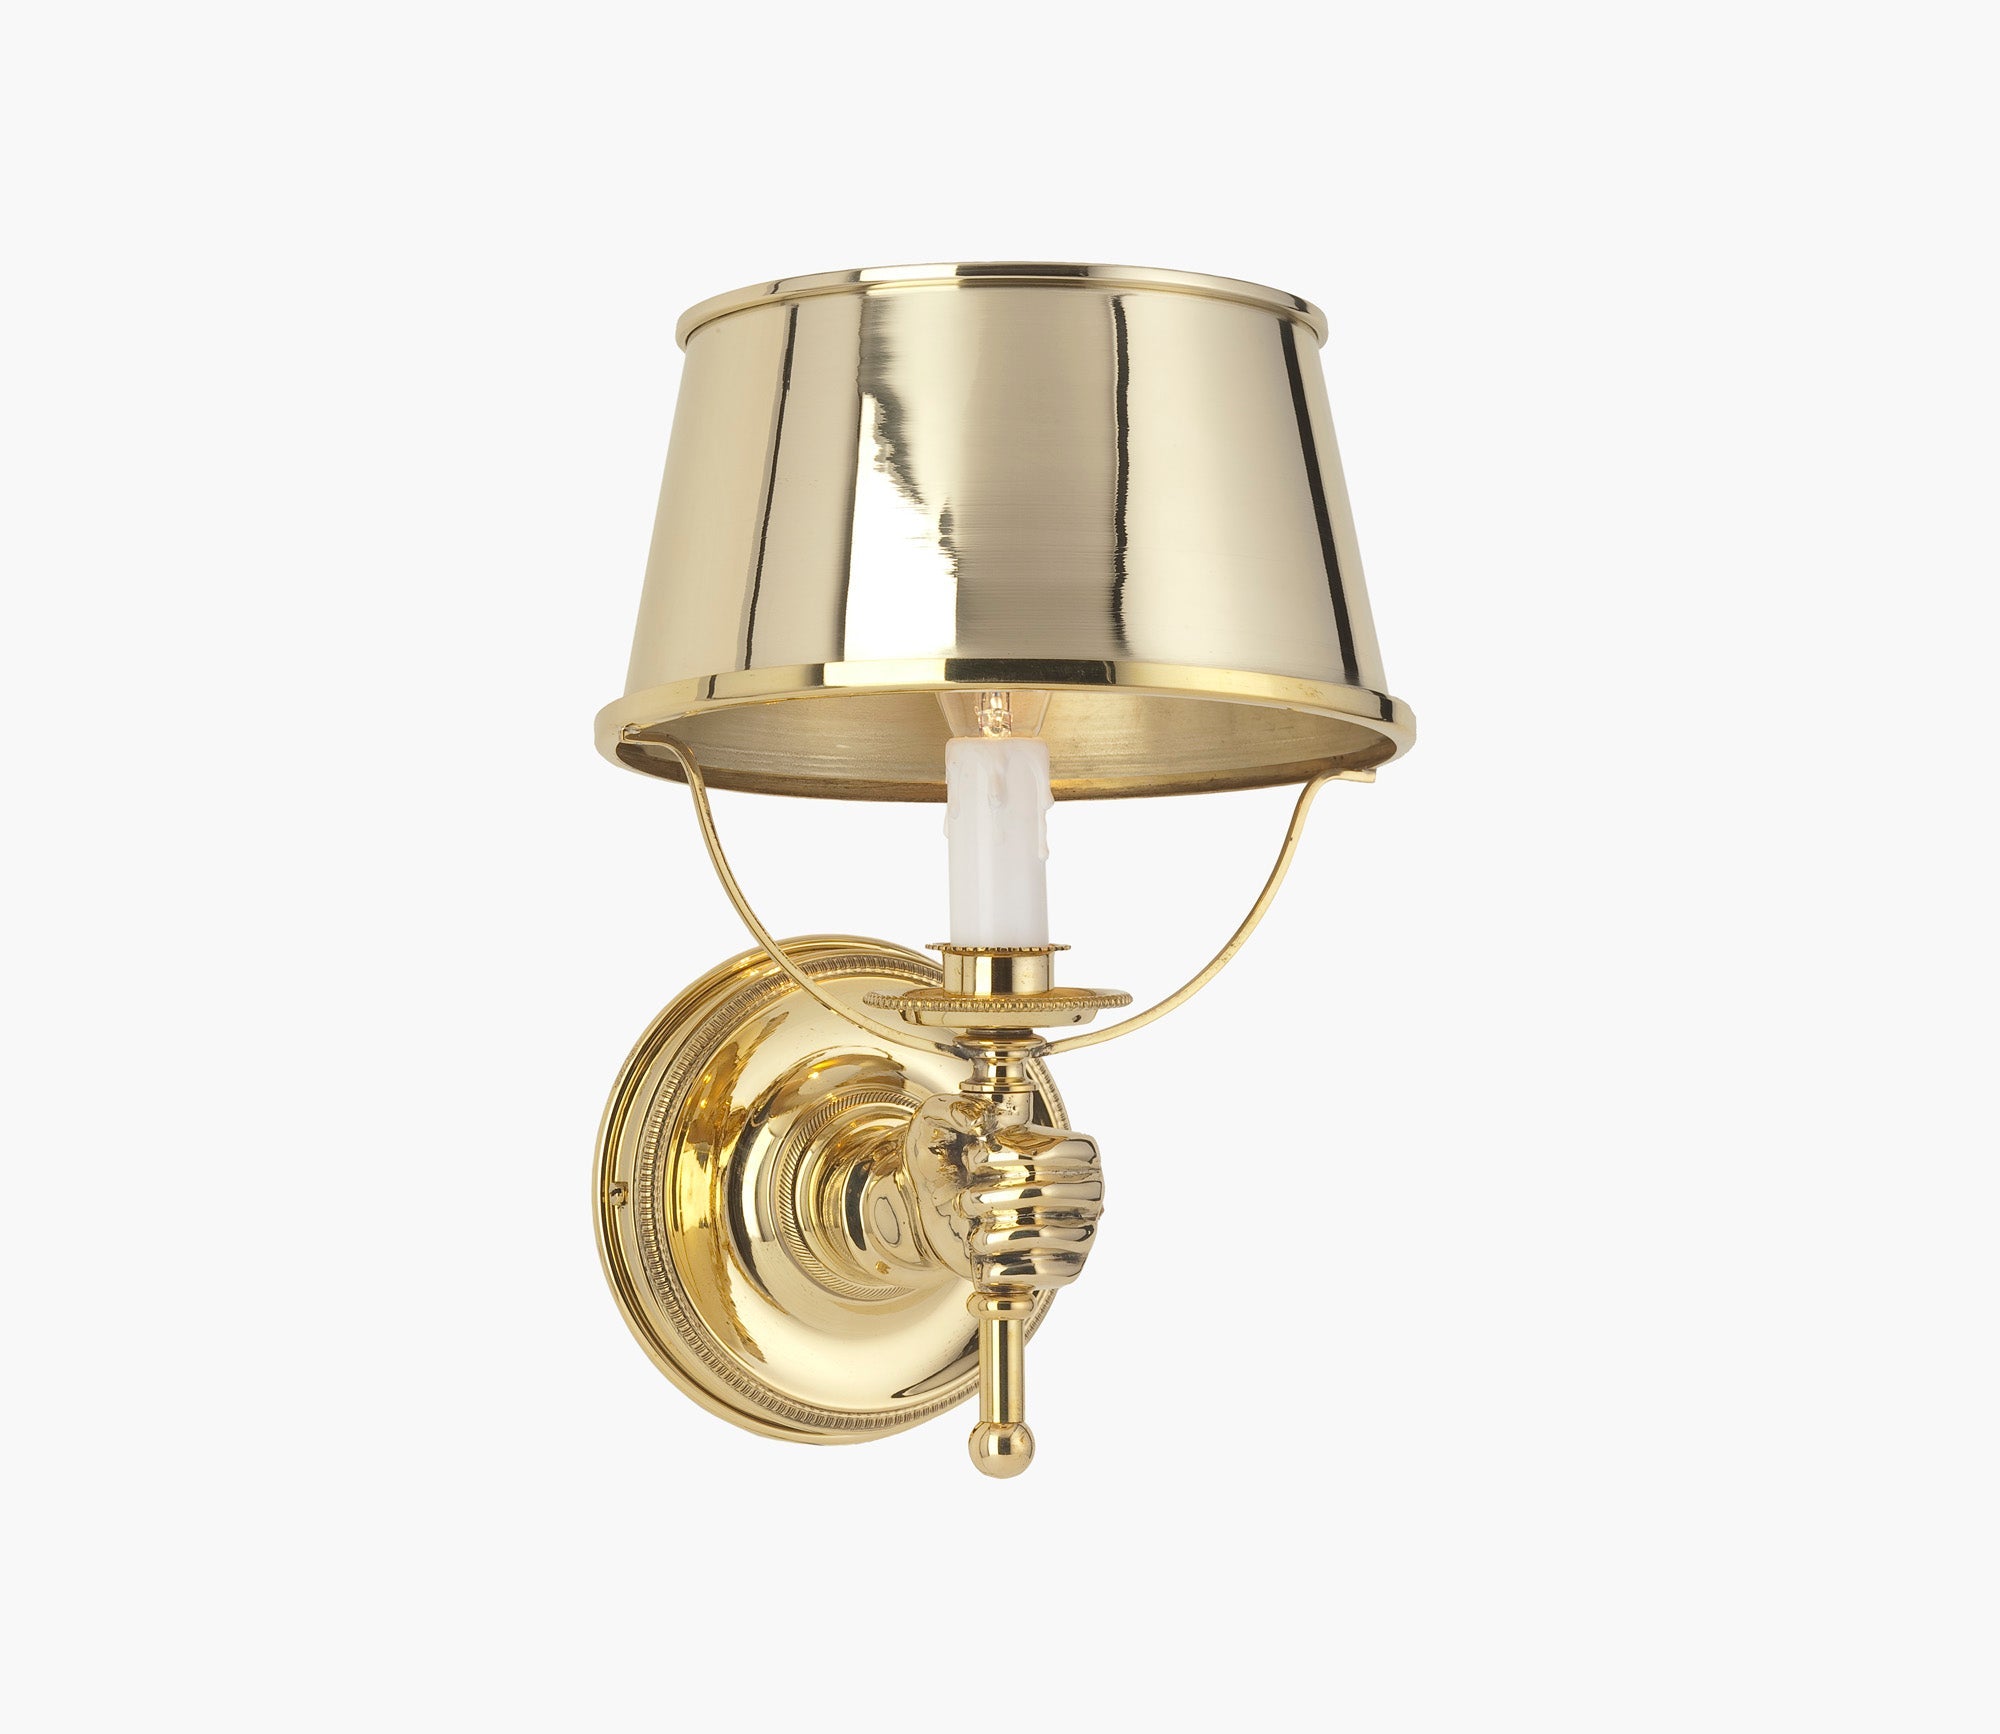 Anchor Wall Light with Matching Metal Shade Product Image 1